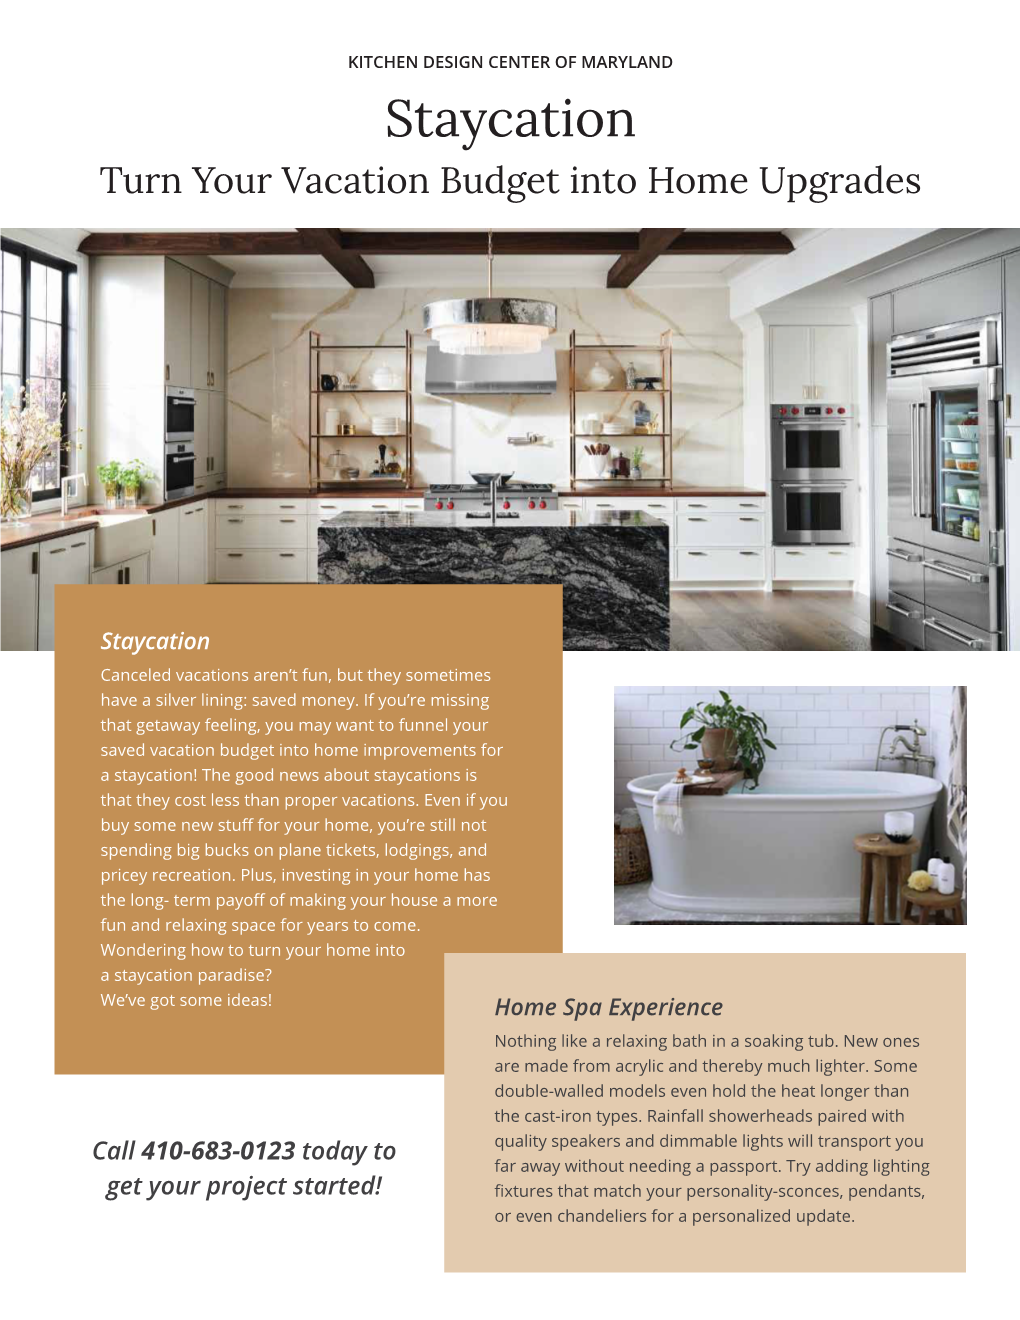 Staycation Turn Your Vacation Budget Into Home Upgrades